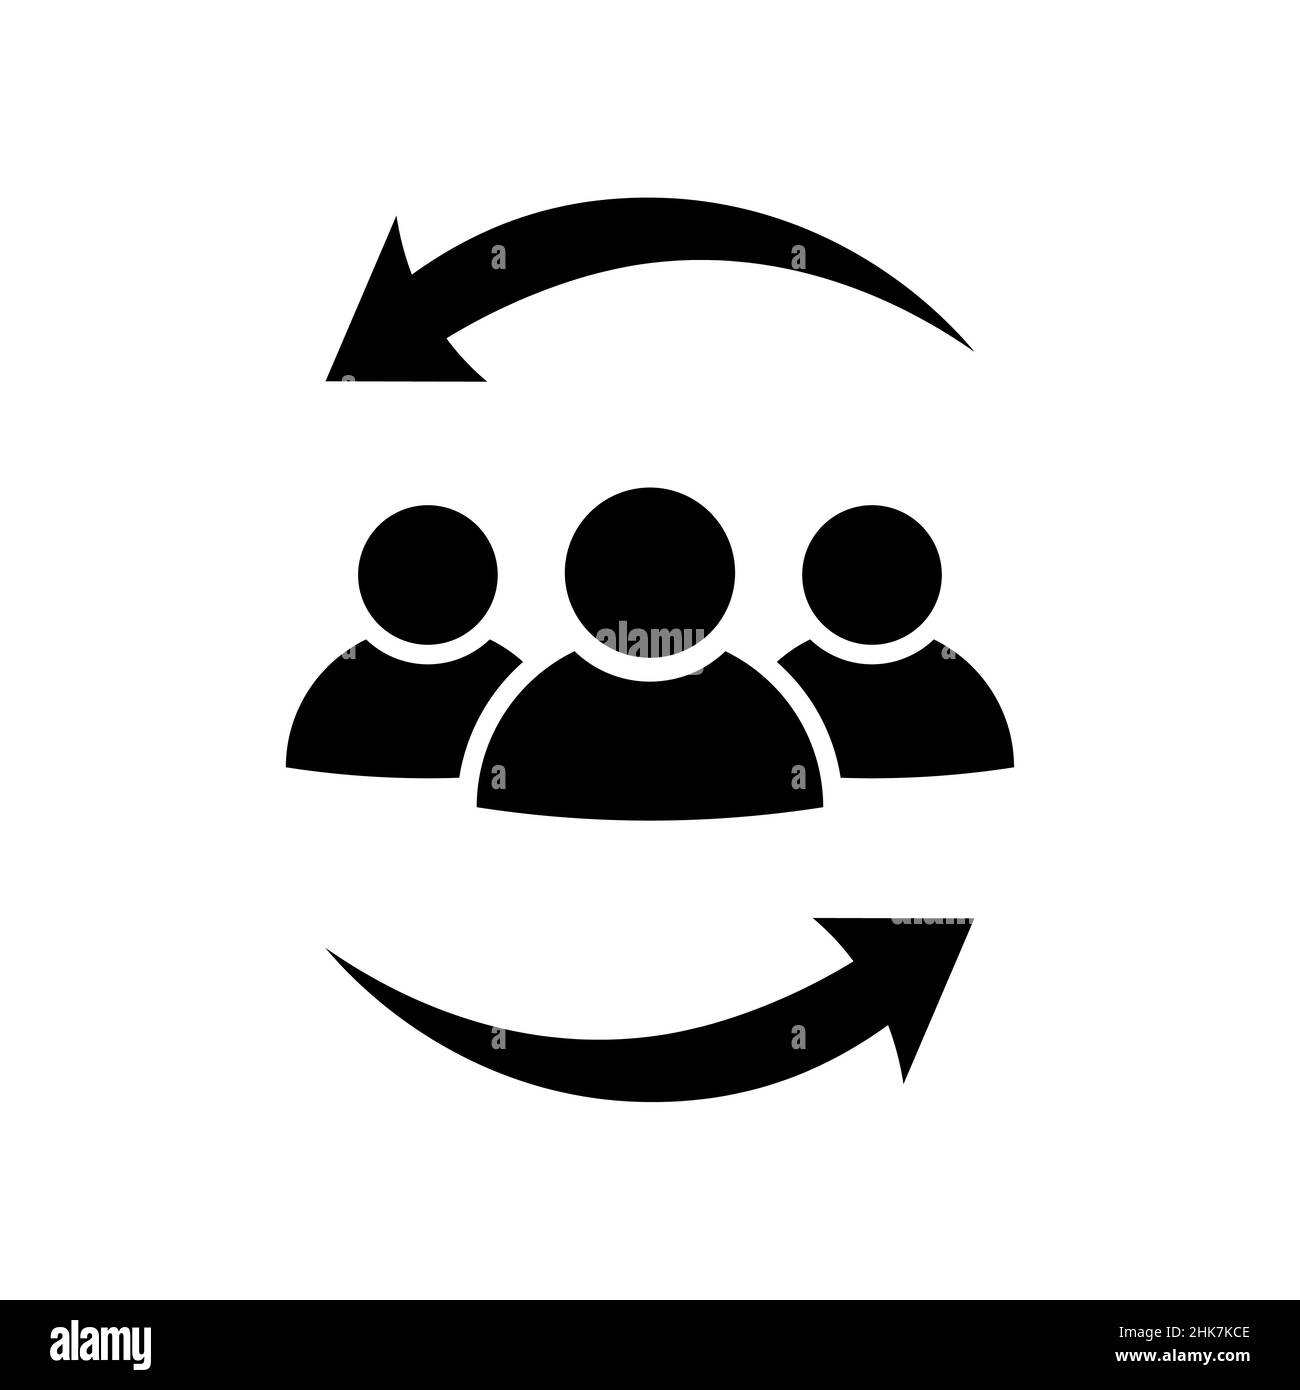 Customer icon in flat style. Customer retention symbol isolated on white. Returning clients icon. Human resource management. Return sign. Customer rel Stock Vector